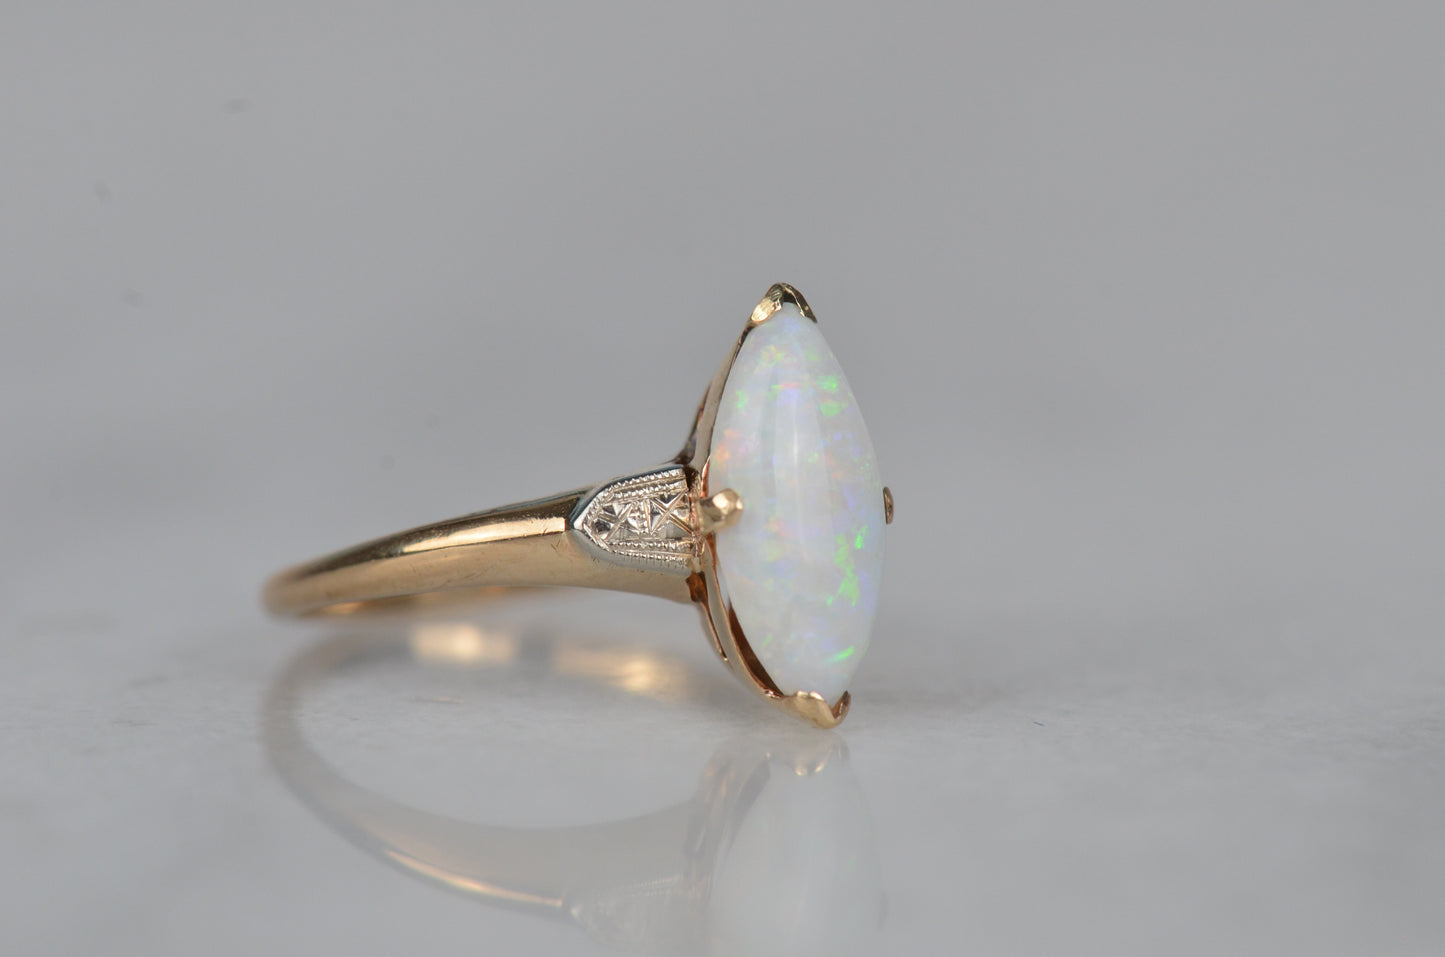 Stunning Vintage Marquise Opal Ring